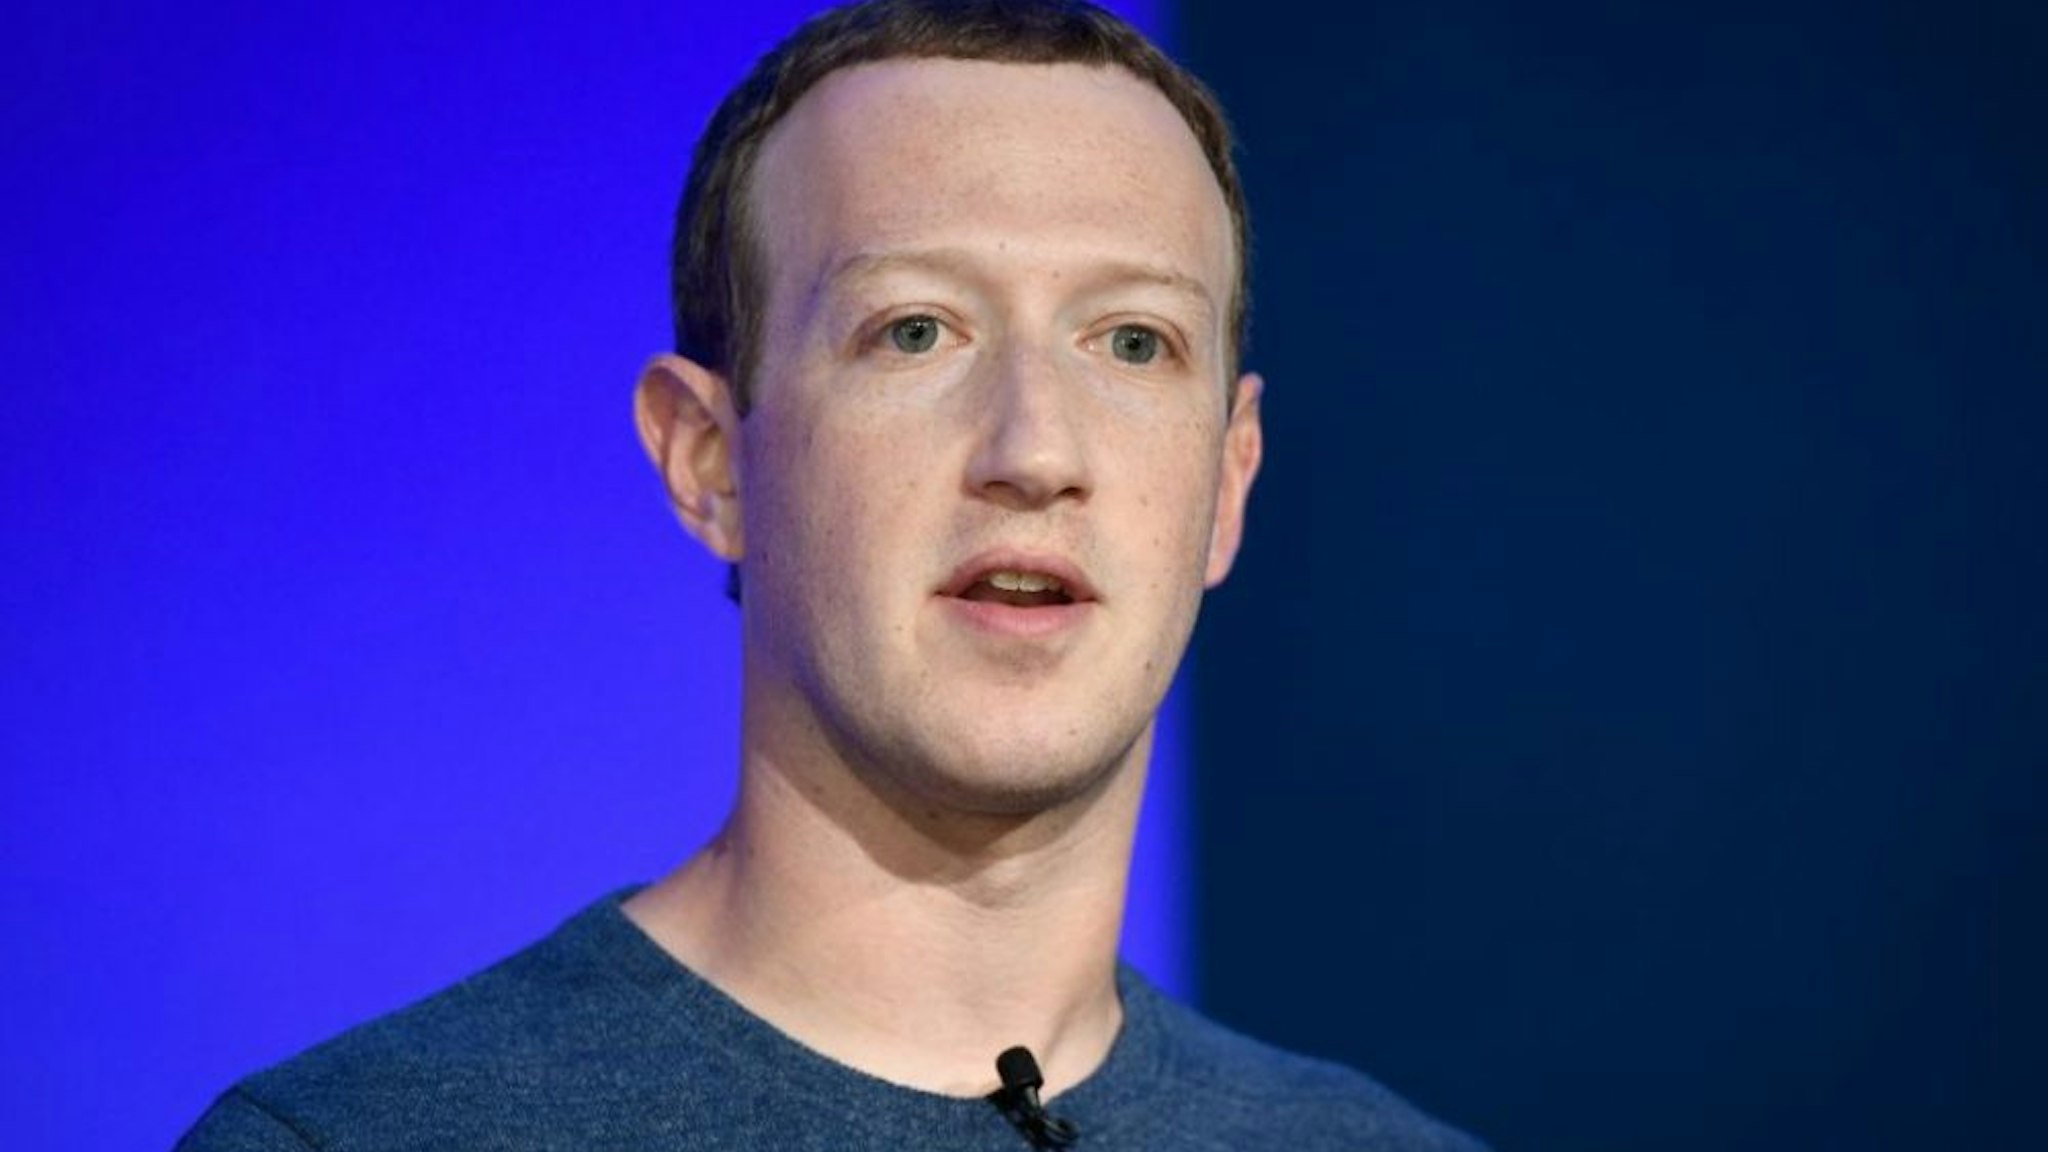 Facebook CEO Mark Zuckerberg speaks during a press conference in Paris on May 23, 2018.